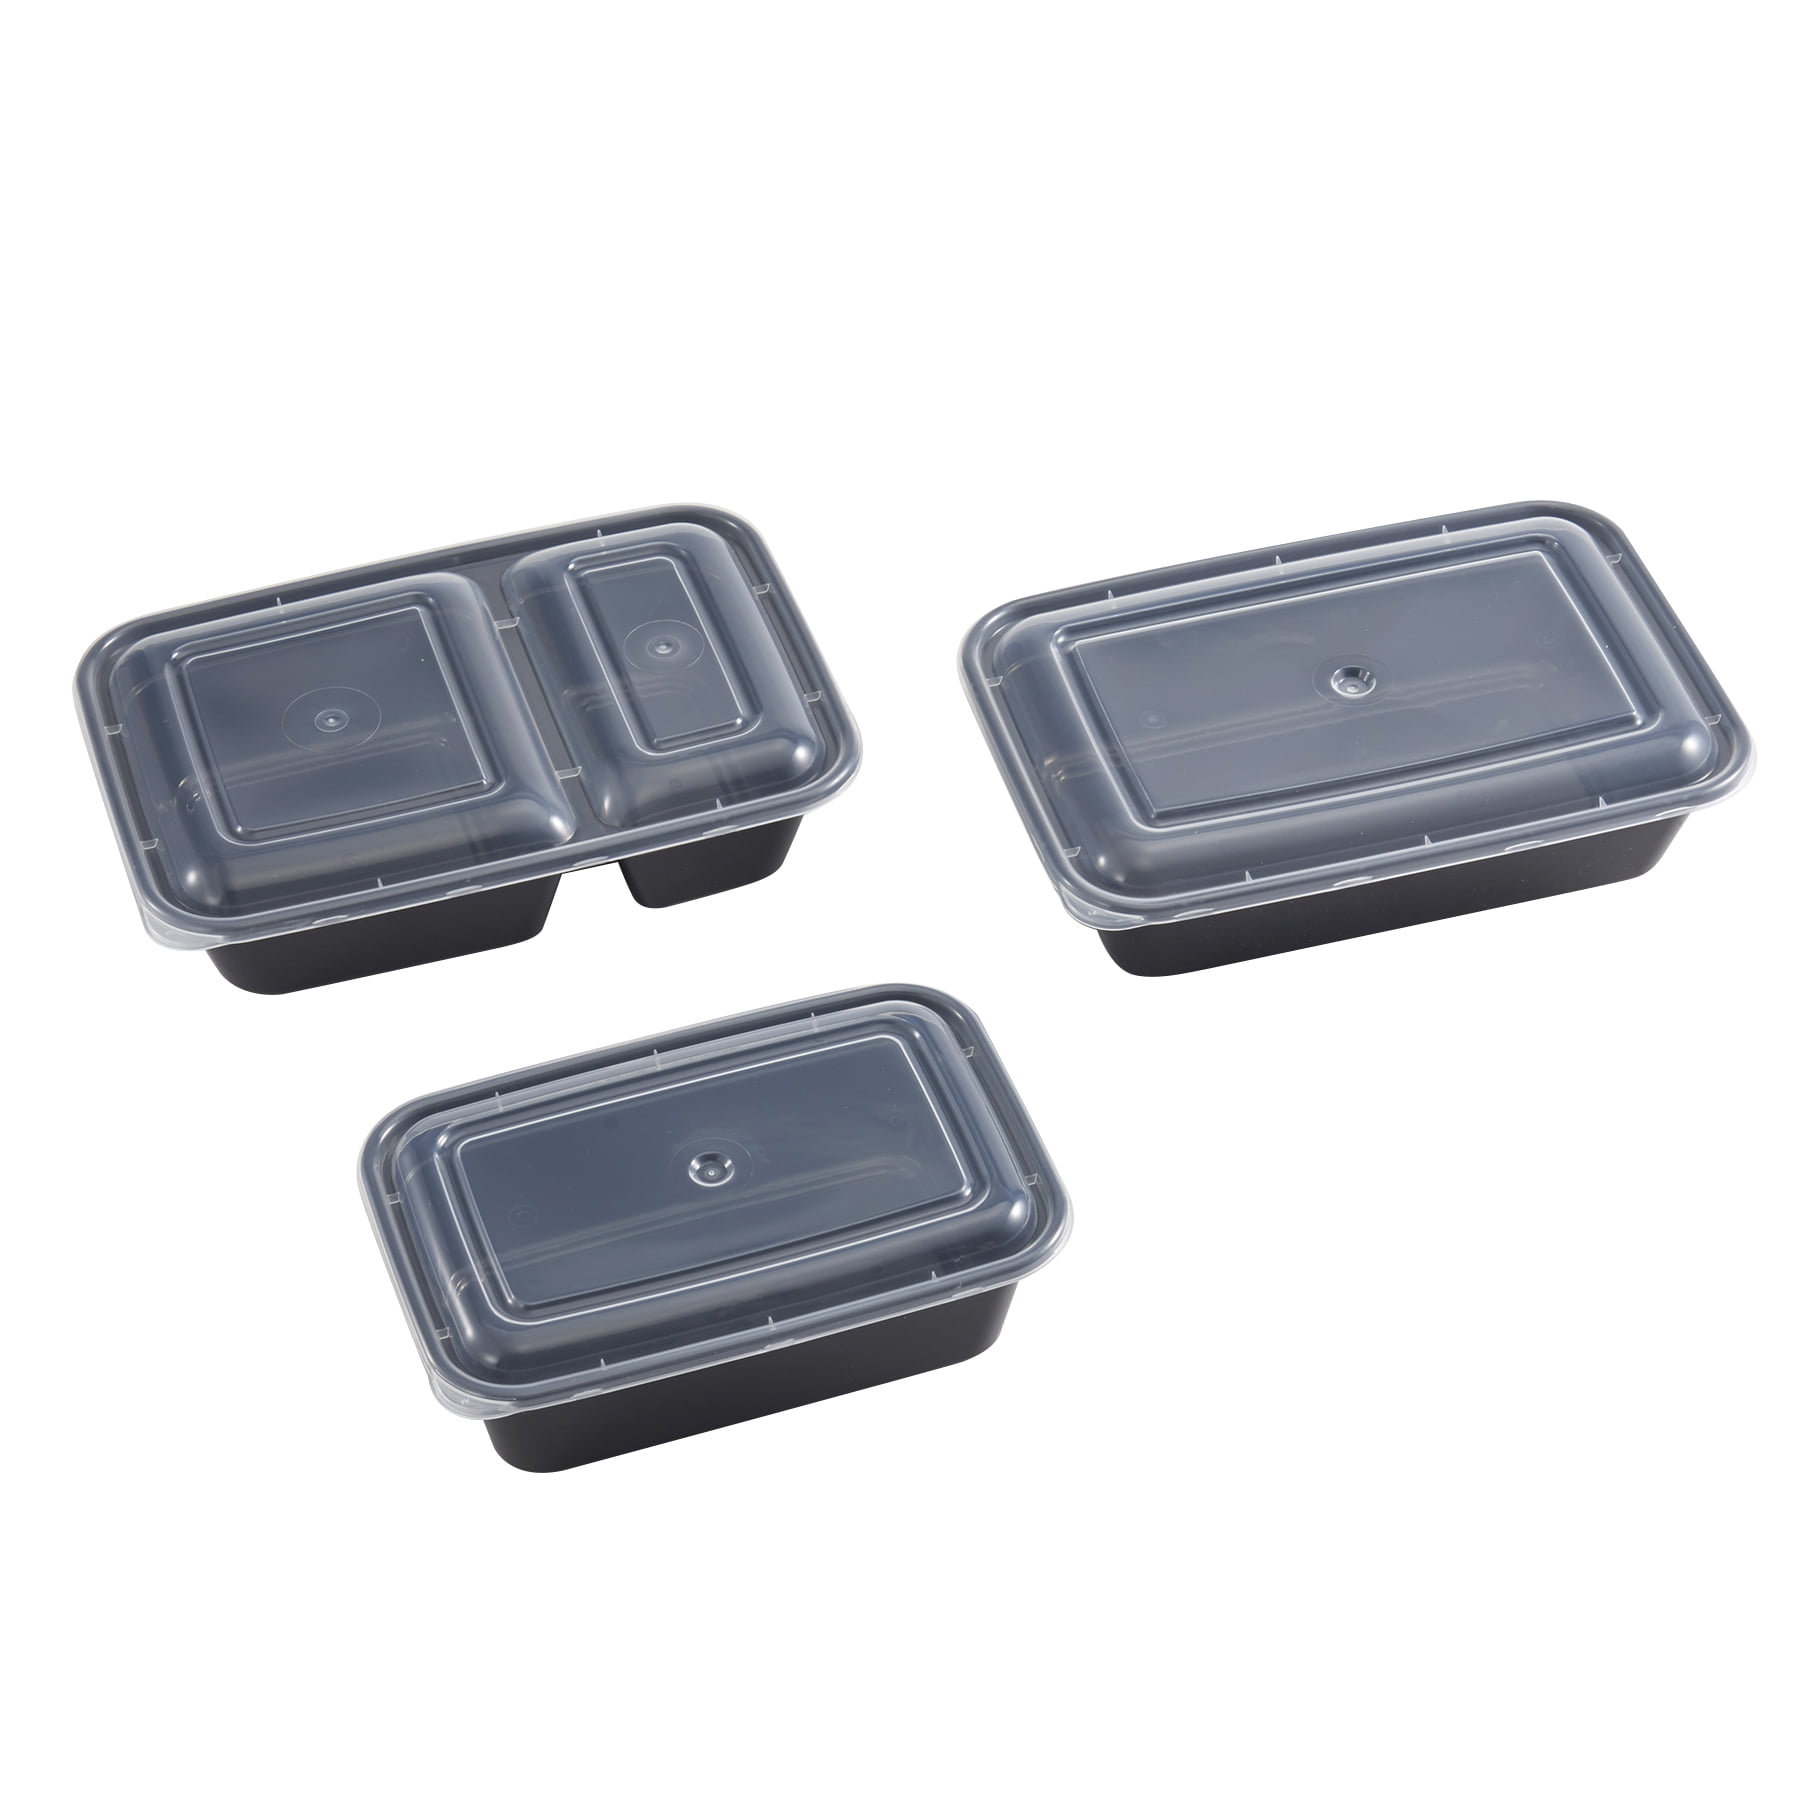 Mainstays 5PK 620ml Rectangular Snack Divider Meal Prep Container, Clear  Lids & Black Containers 